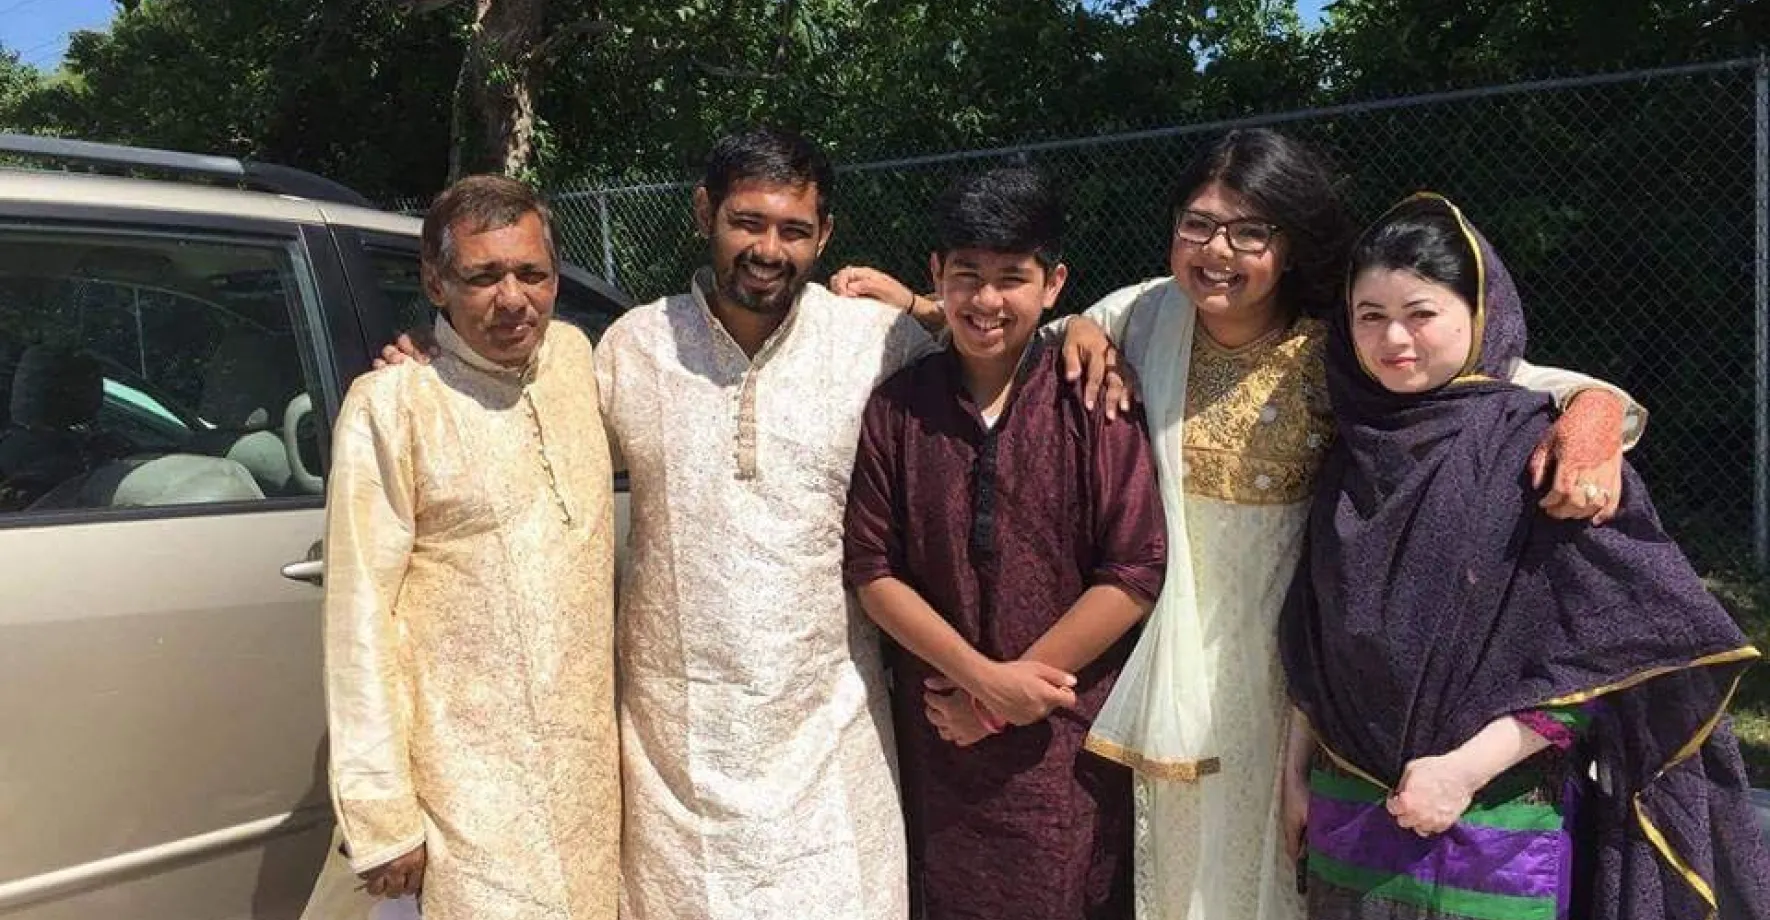 Family of  5 Bengali people